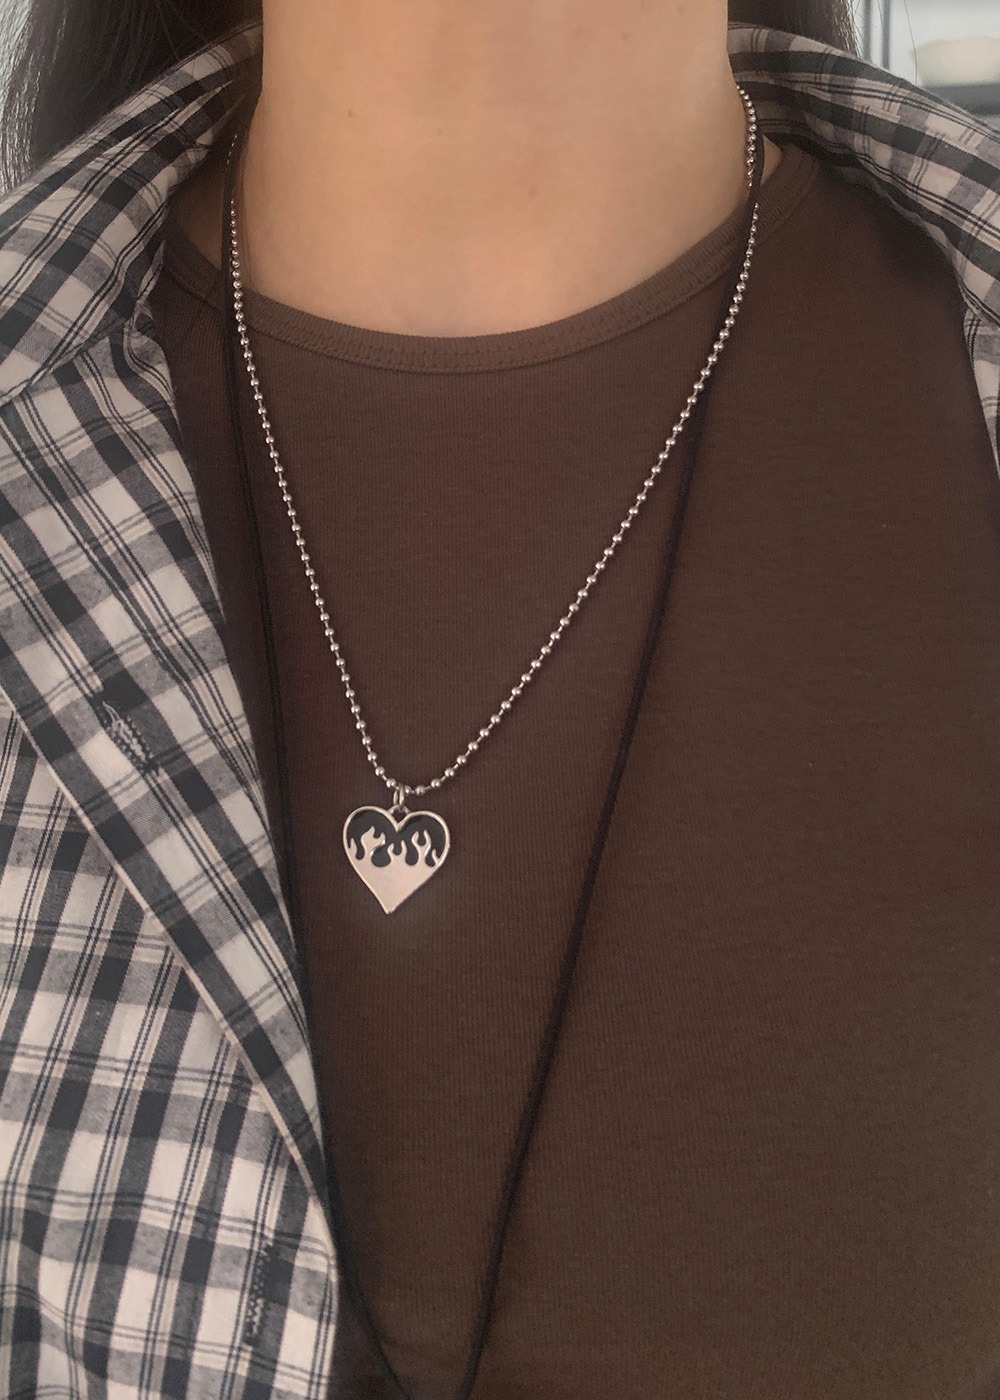 HEART FLAME NECKLACE